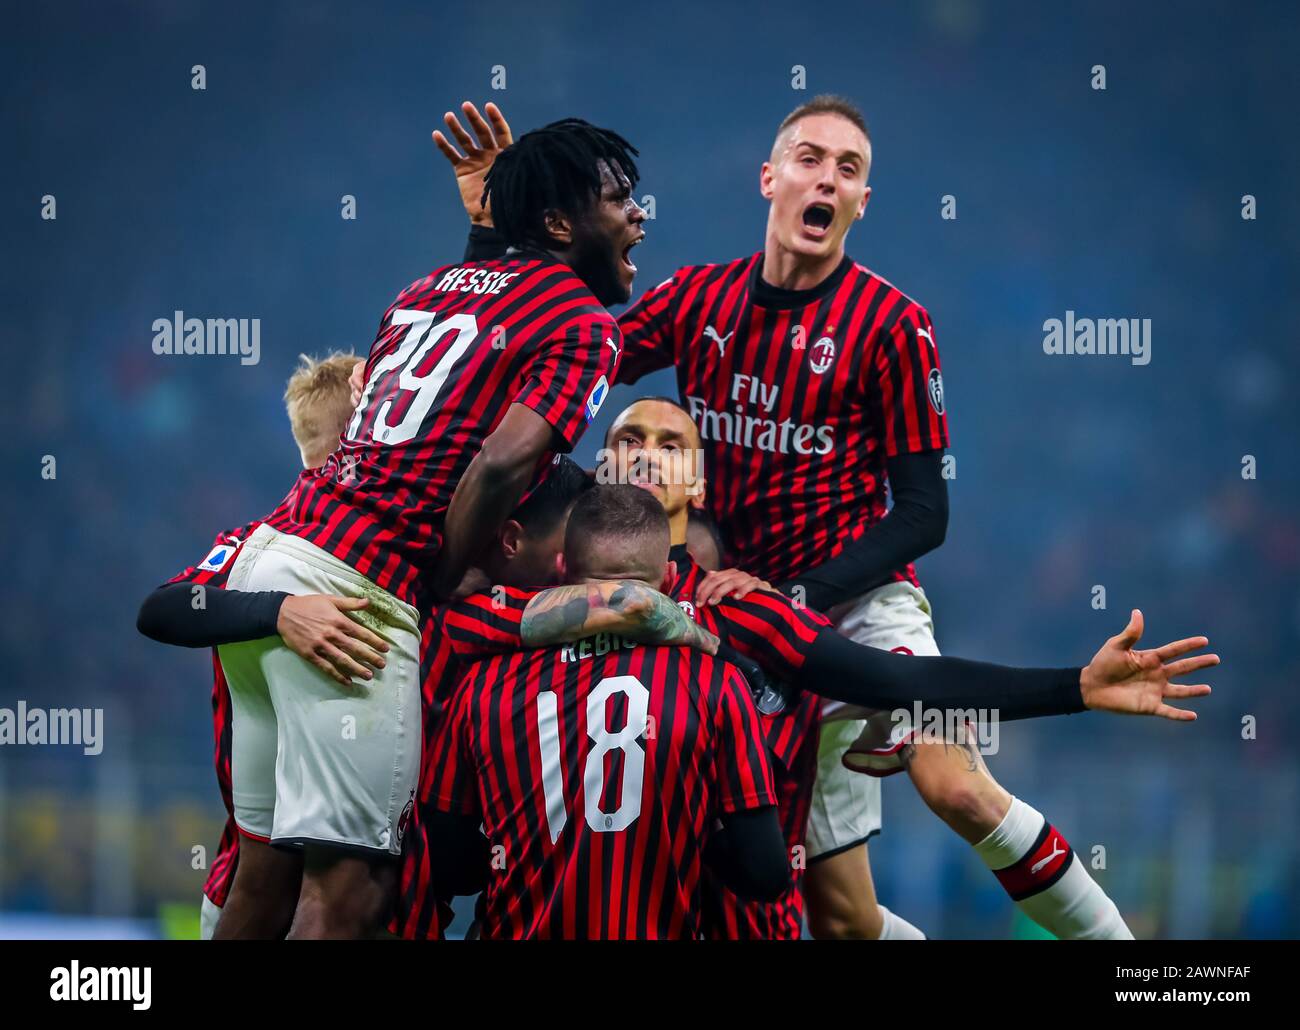 Milano, Italy, 09 Feb 2020, zlatan ibrahimovic of ac milan celebrates with his teammates goal during FC Internazionale vs AC Milan - italian Serie A soccer match - Credit: LPS/Fabrizio Carabelli/Alamy Live News Stock Photo